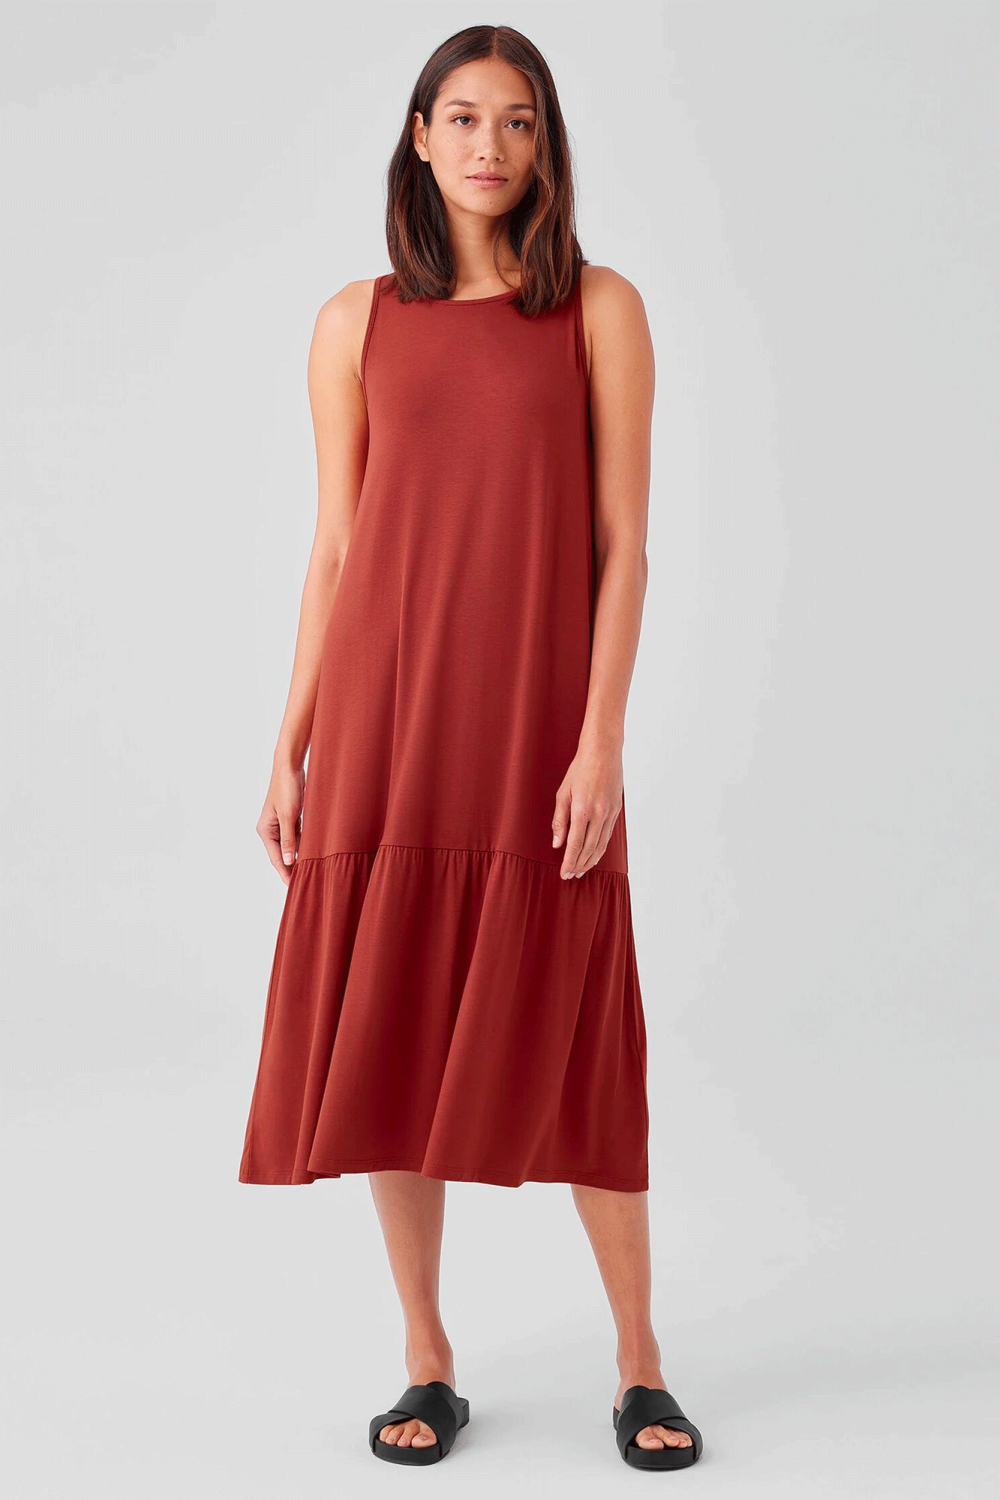 Designed for effortless elegance, the Fine Jersey Tiered Dress from Eileen Fisher features lightweight fabric and a classic tiered detail.